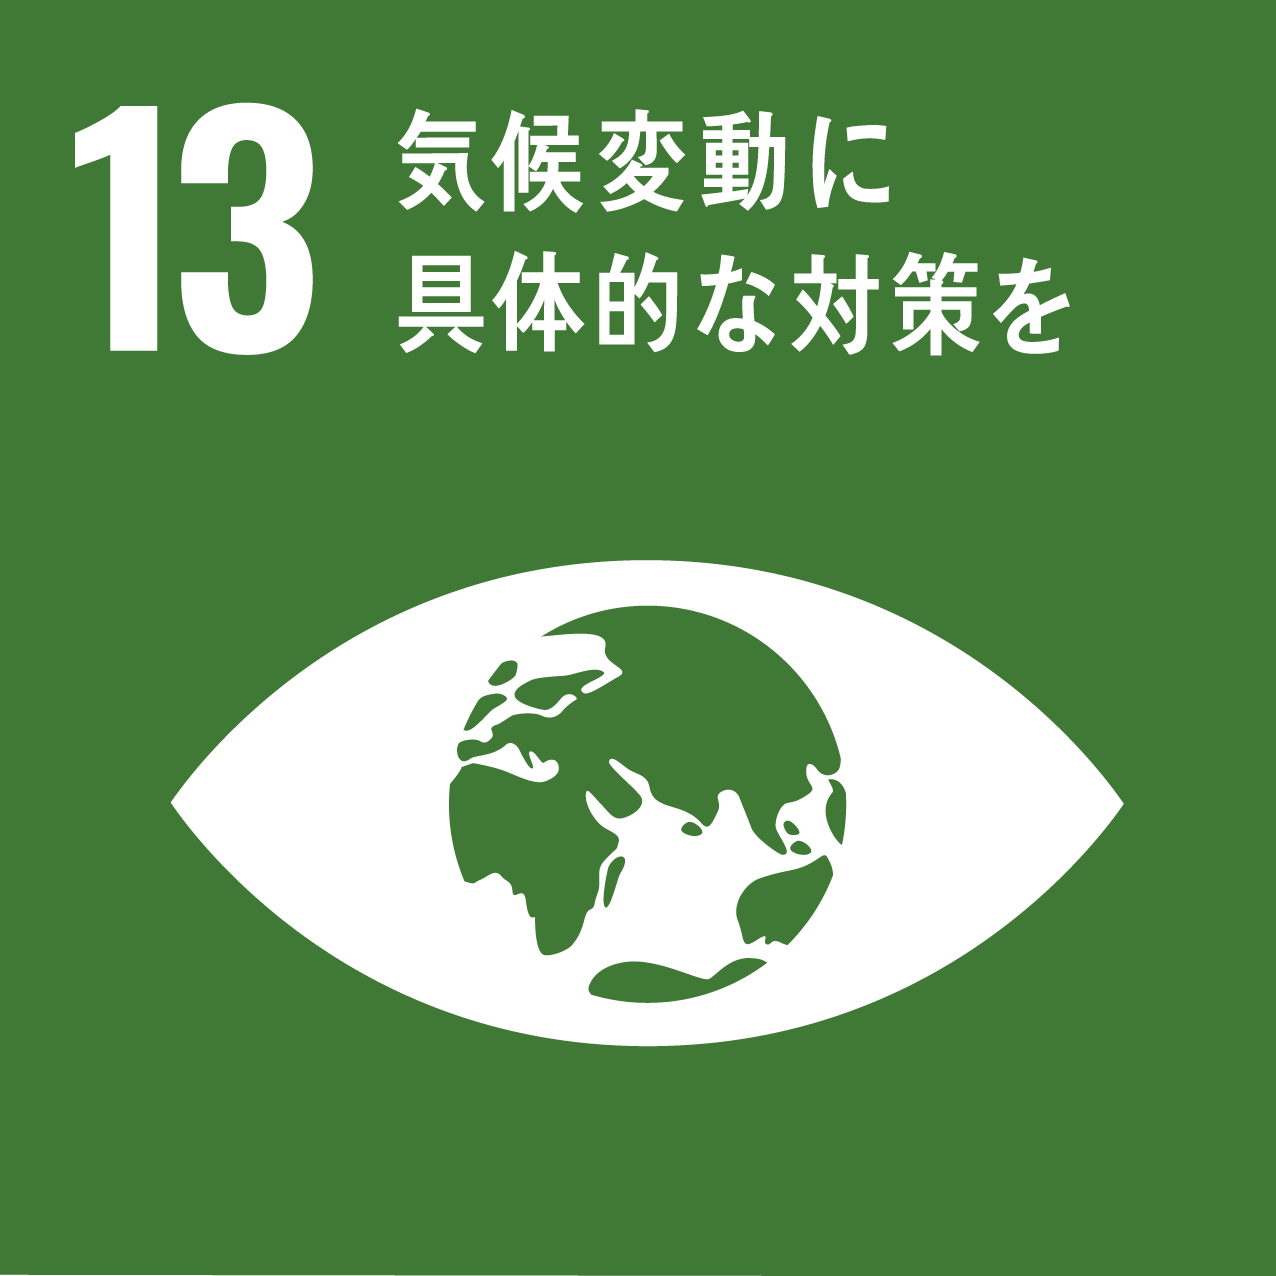 https://ambienthome.com/knowledge/images/sdg_icon_13_ja_2.png